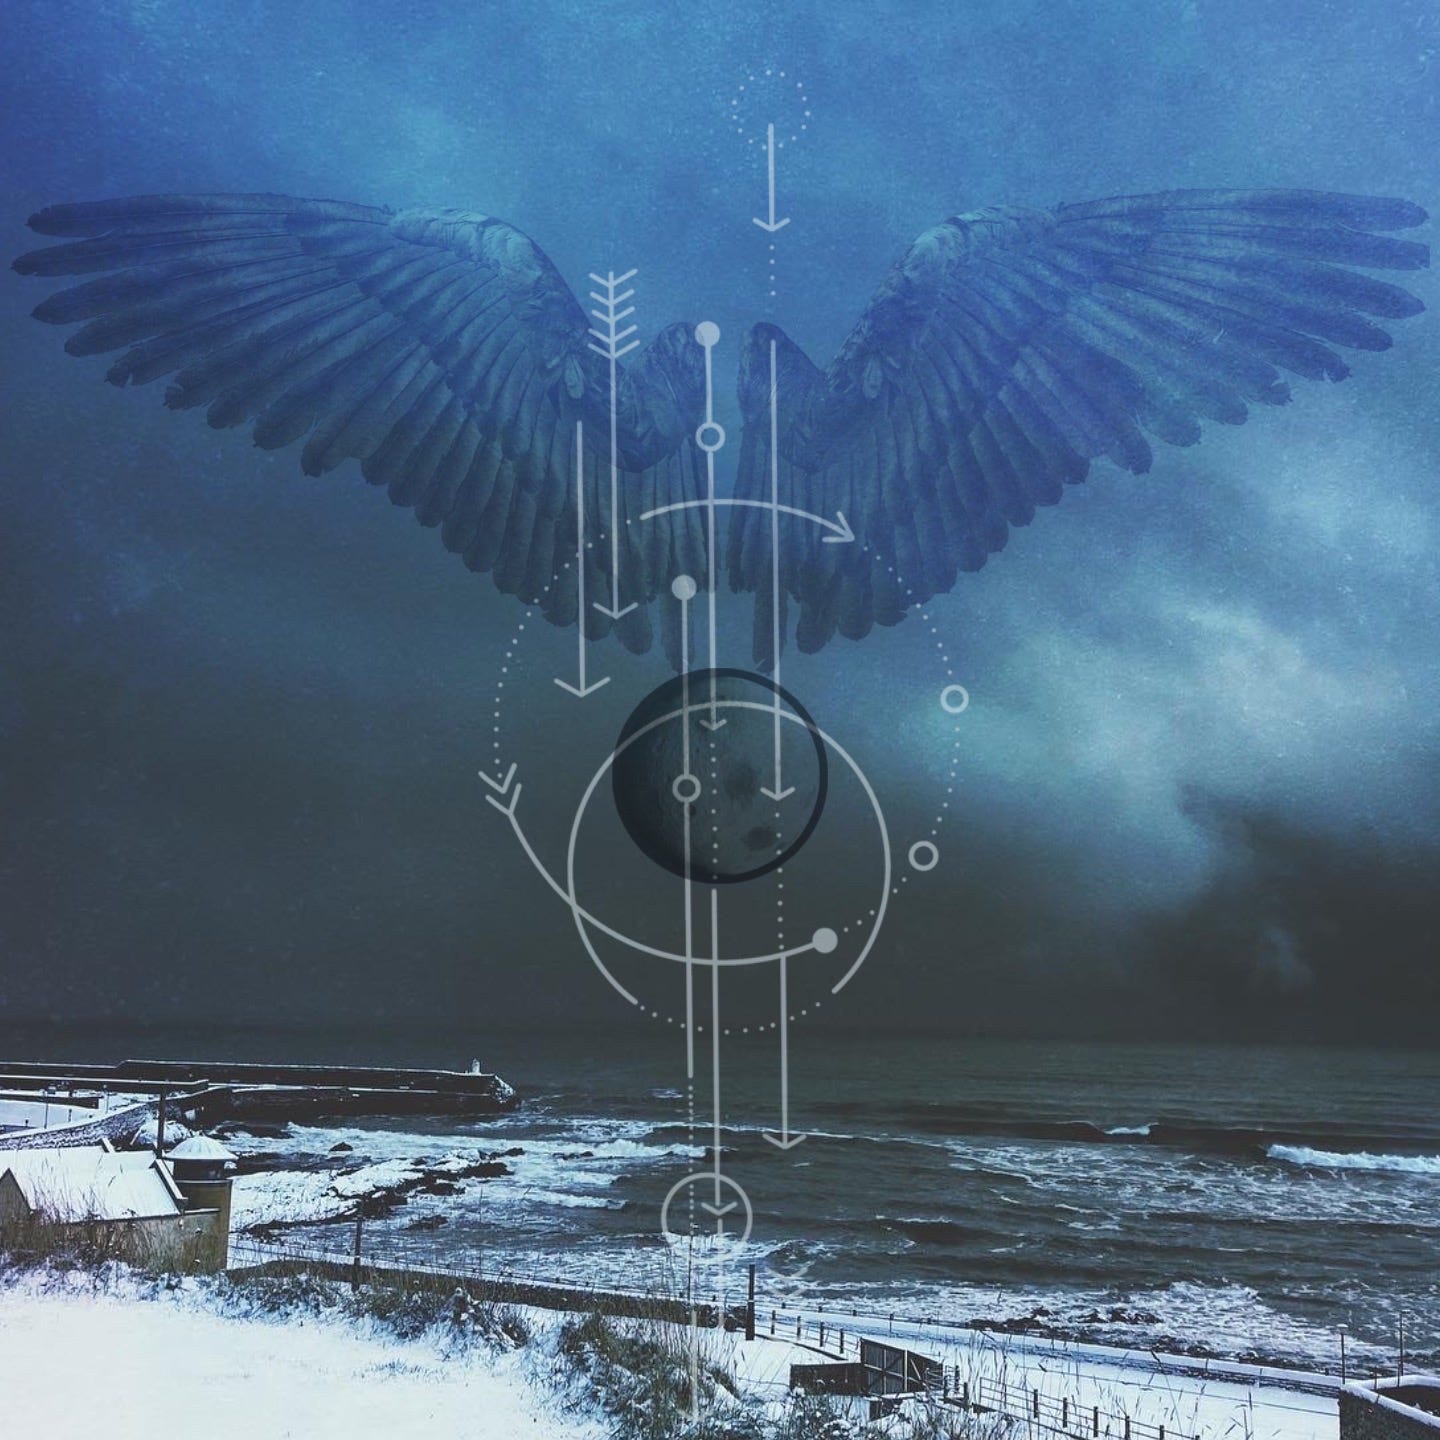 Digital collage of a photo of the North sea in a snowstorm with the wings of a raven and a dark moon superimposed with arrows and circles descending to earth